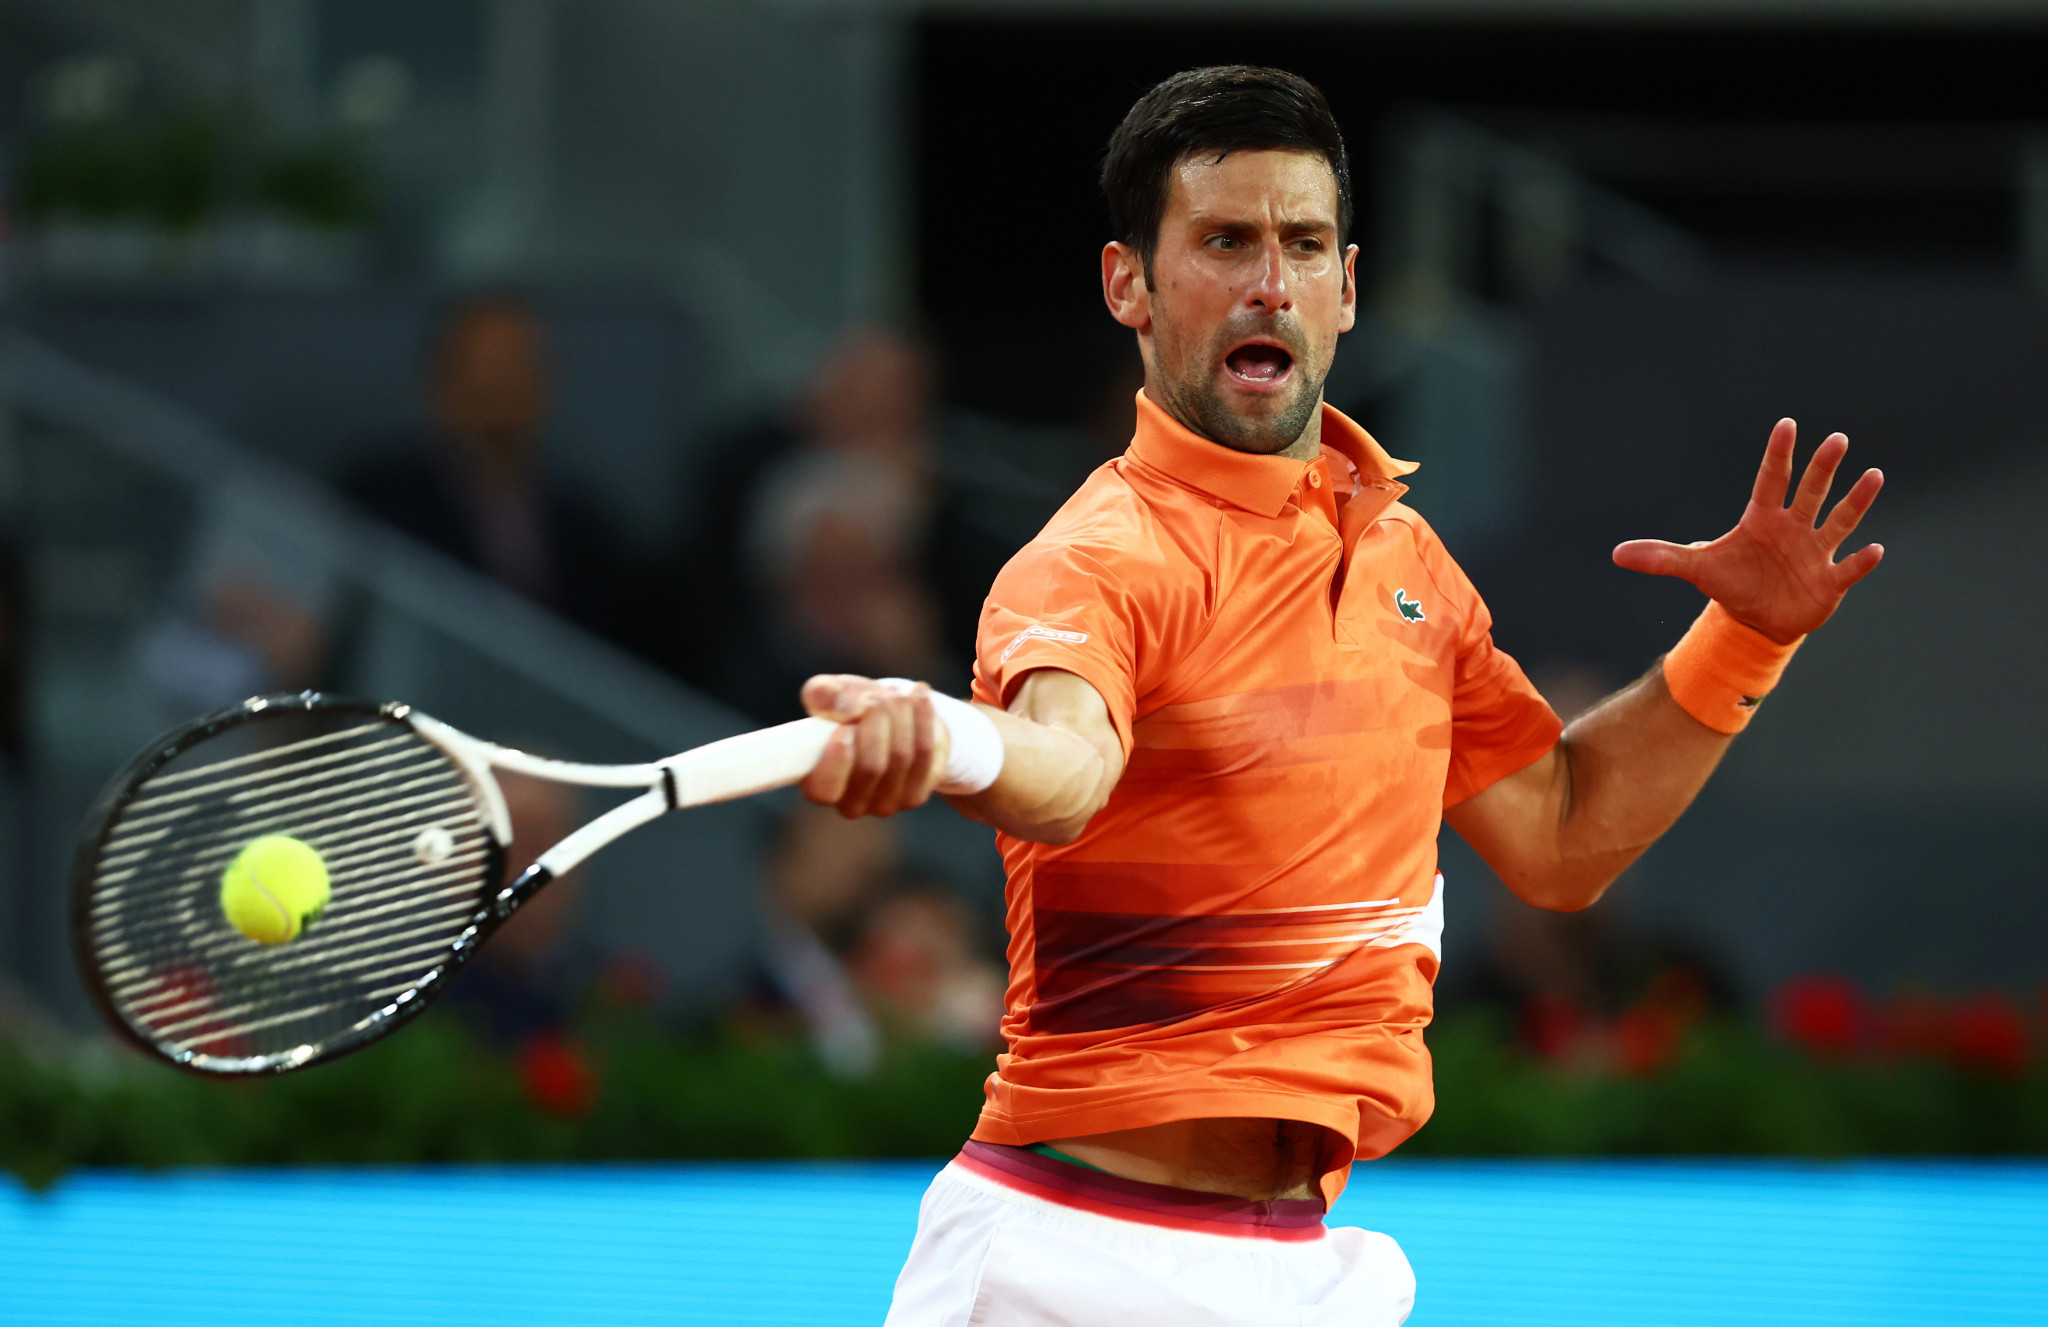 Men’s top seed Djokovic triumphs on day of mixed fortunes for British Grand Slam champions at Madrid Open tennis